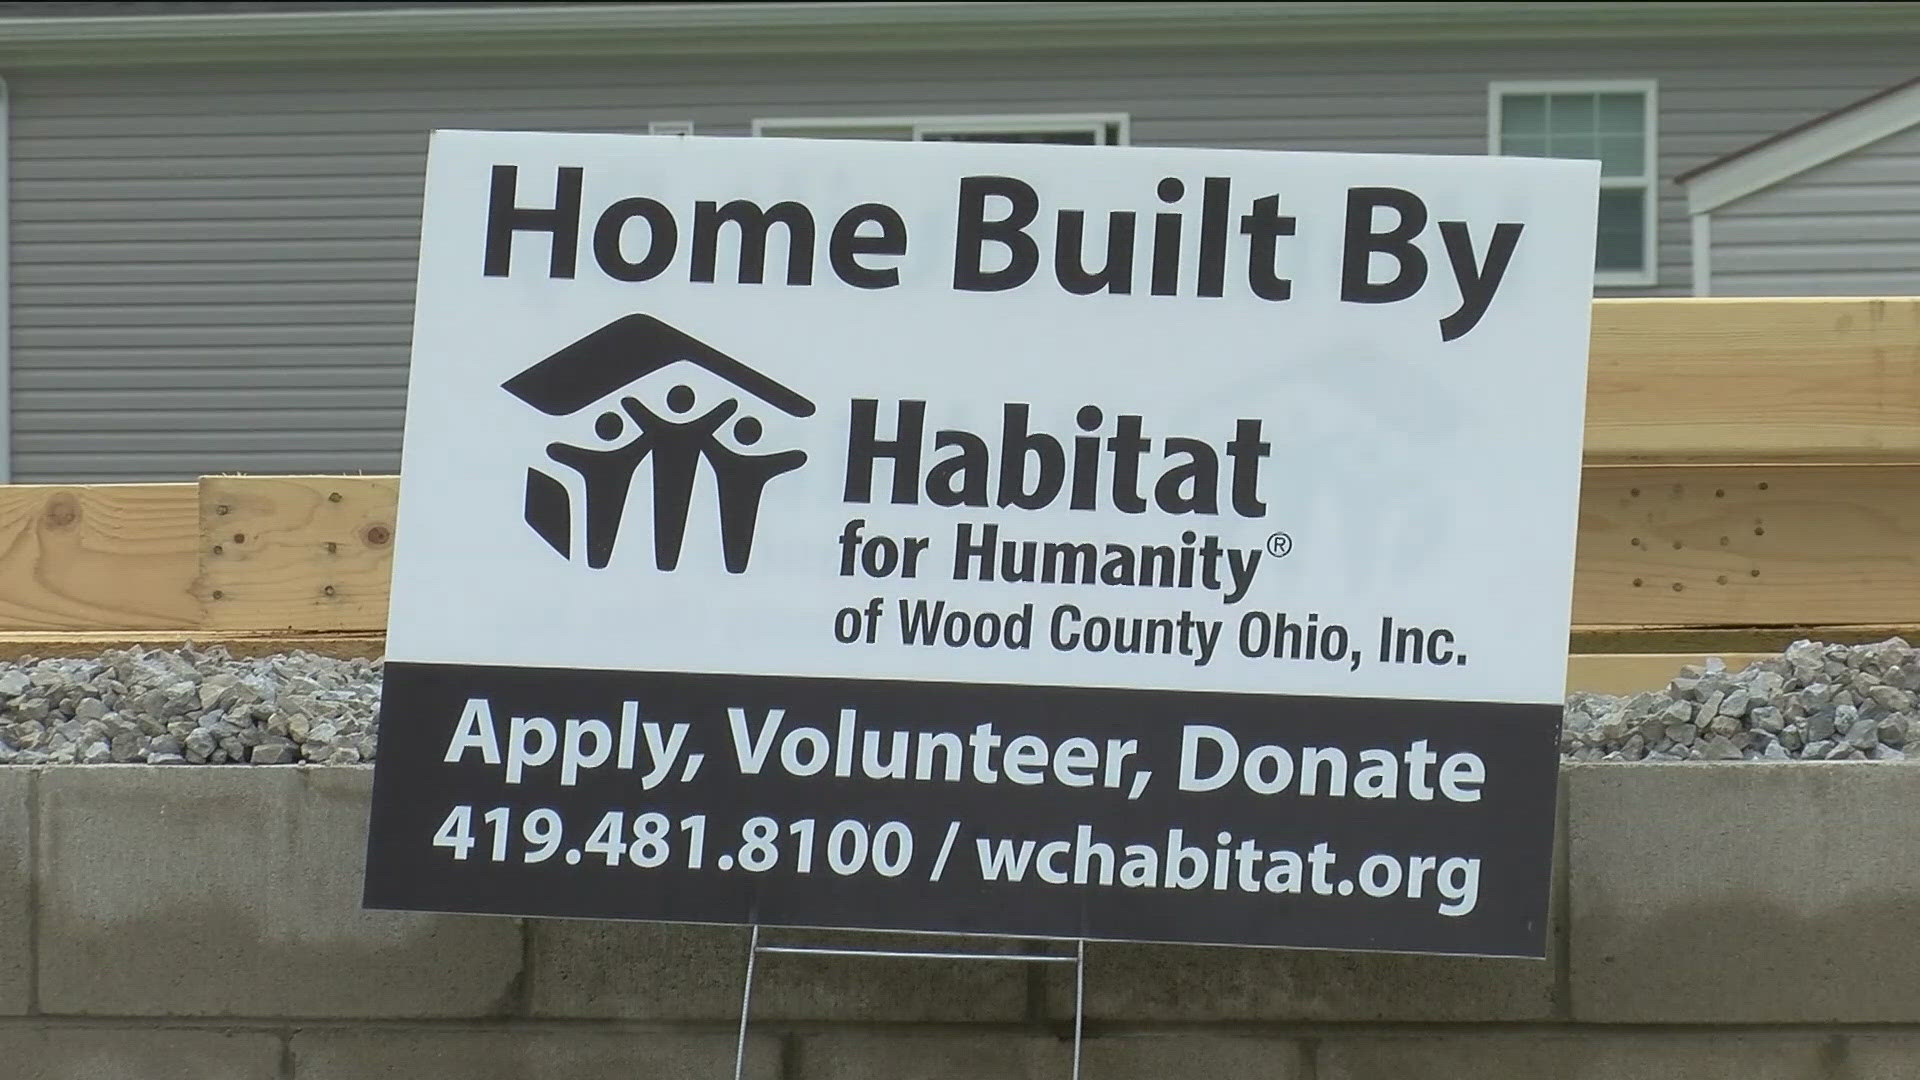 If you are selected, there is a process an applicant must complete in order to receive a Habitat home.